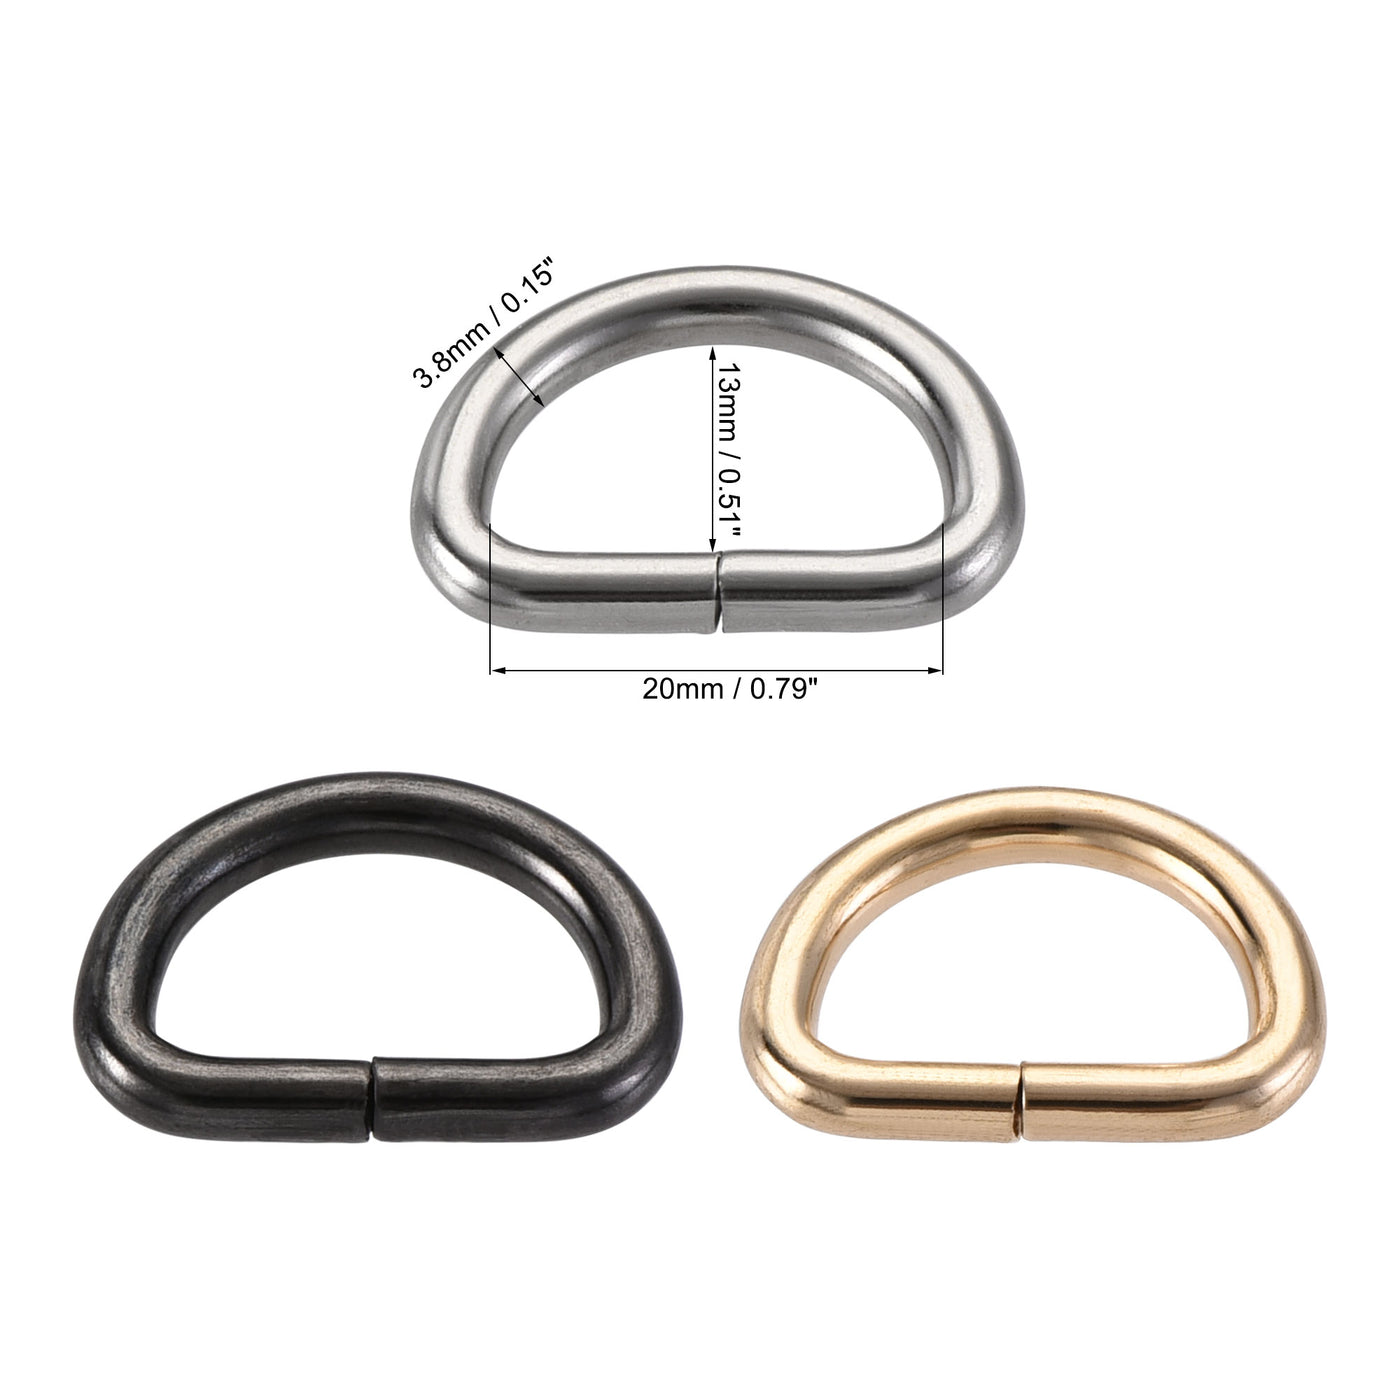 uxcell Uxcell Metal D Ring 0.79"(20mm) D-Rings Buckle for Hardware Craft DIY Gold Tone, Silver Tone, Black(Total 15pcs)